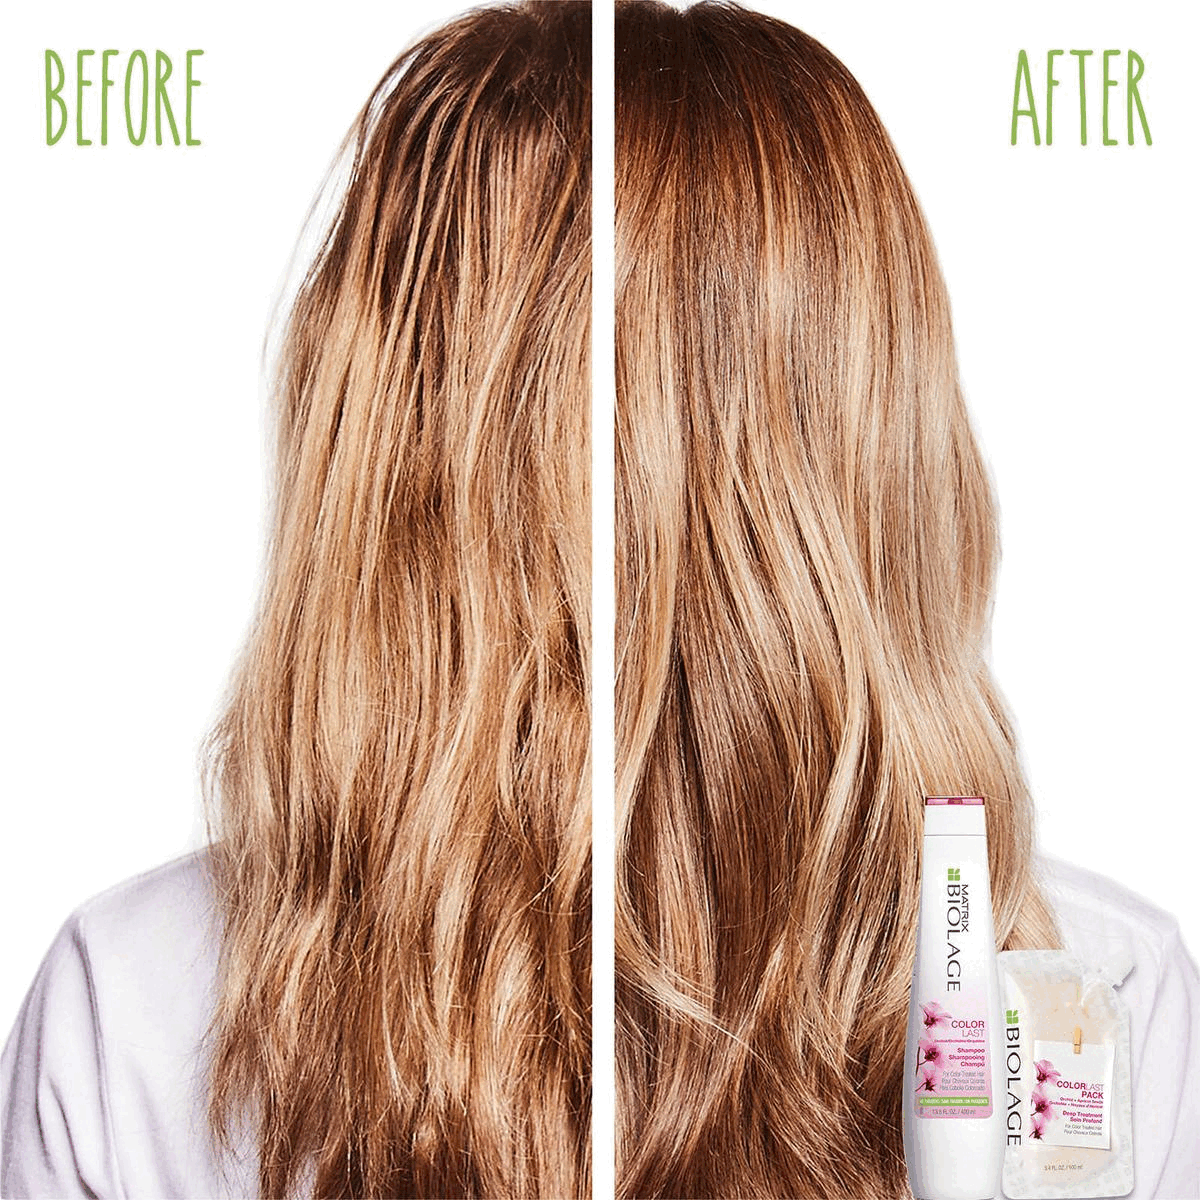 Before and after shot.Conditioner review. Conditioner Benefits. Colorlast deep treatment and colorlast conditioner